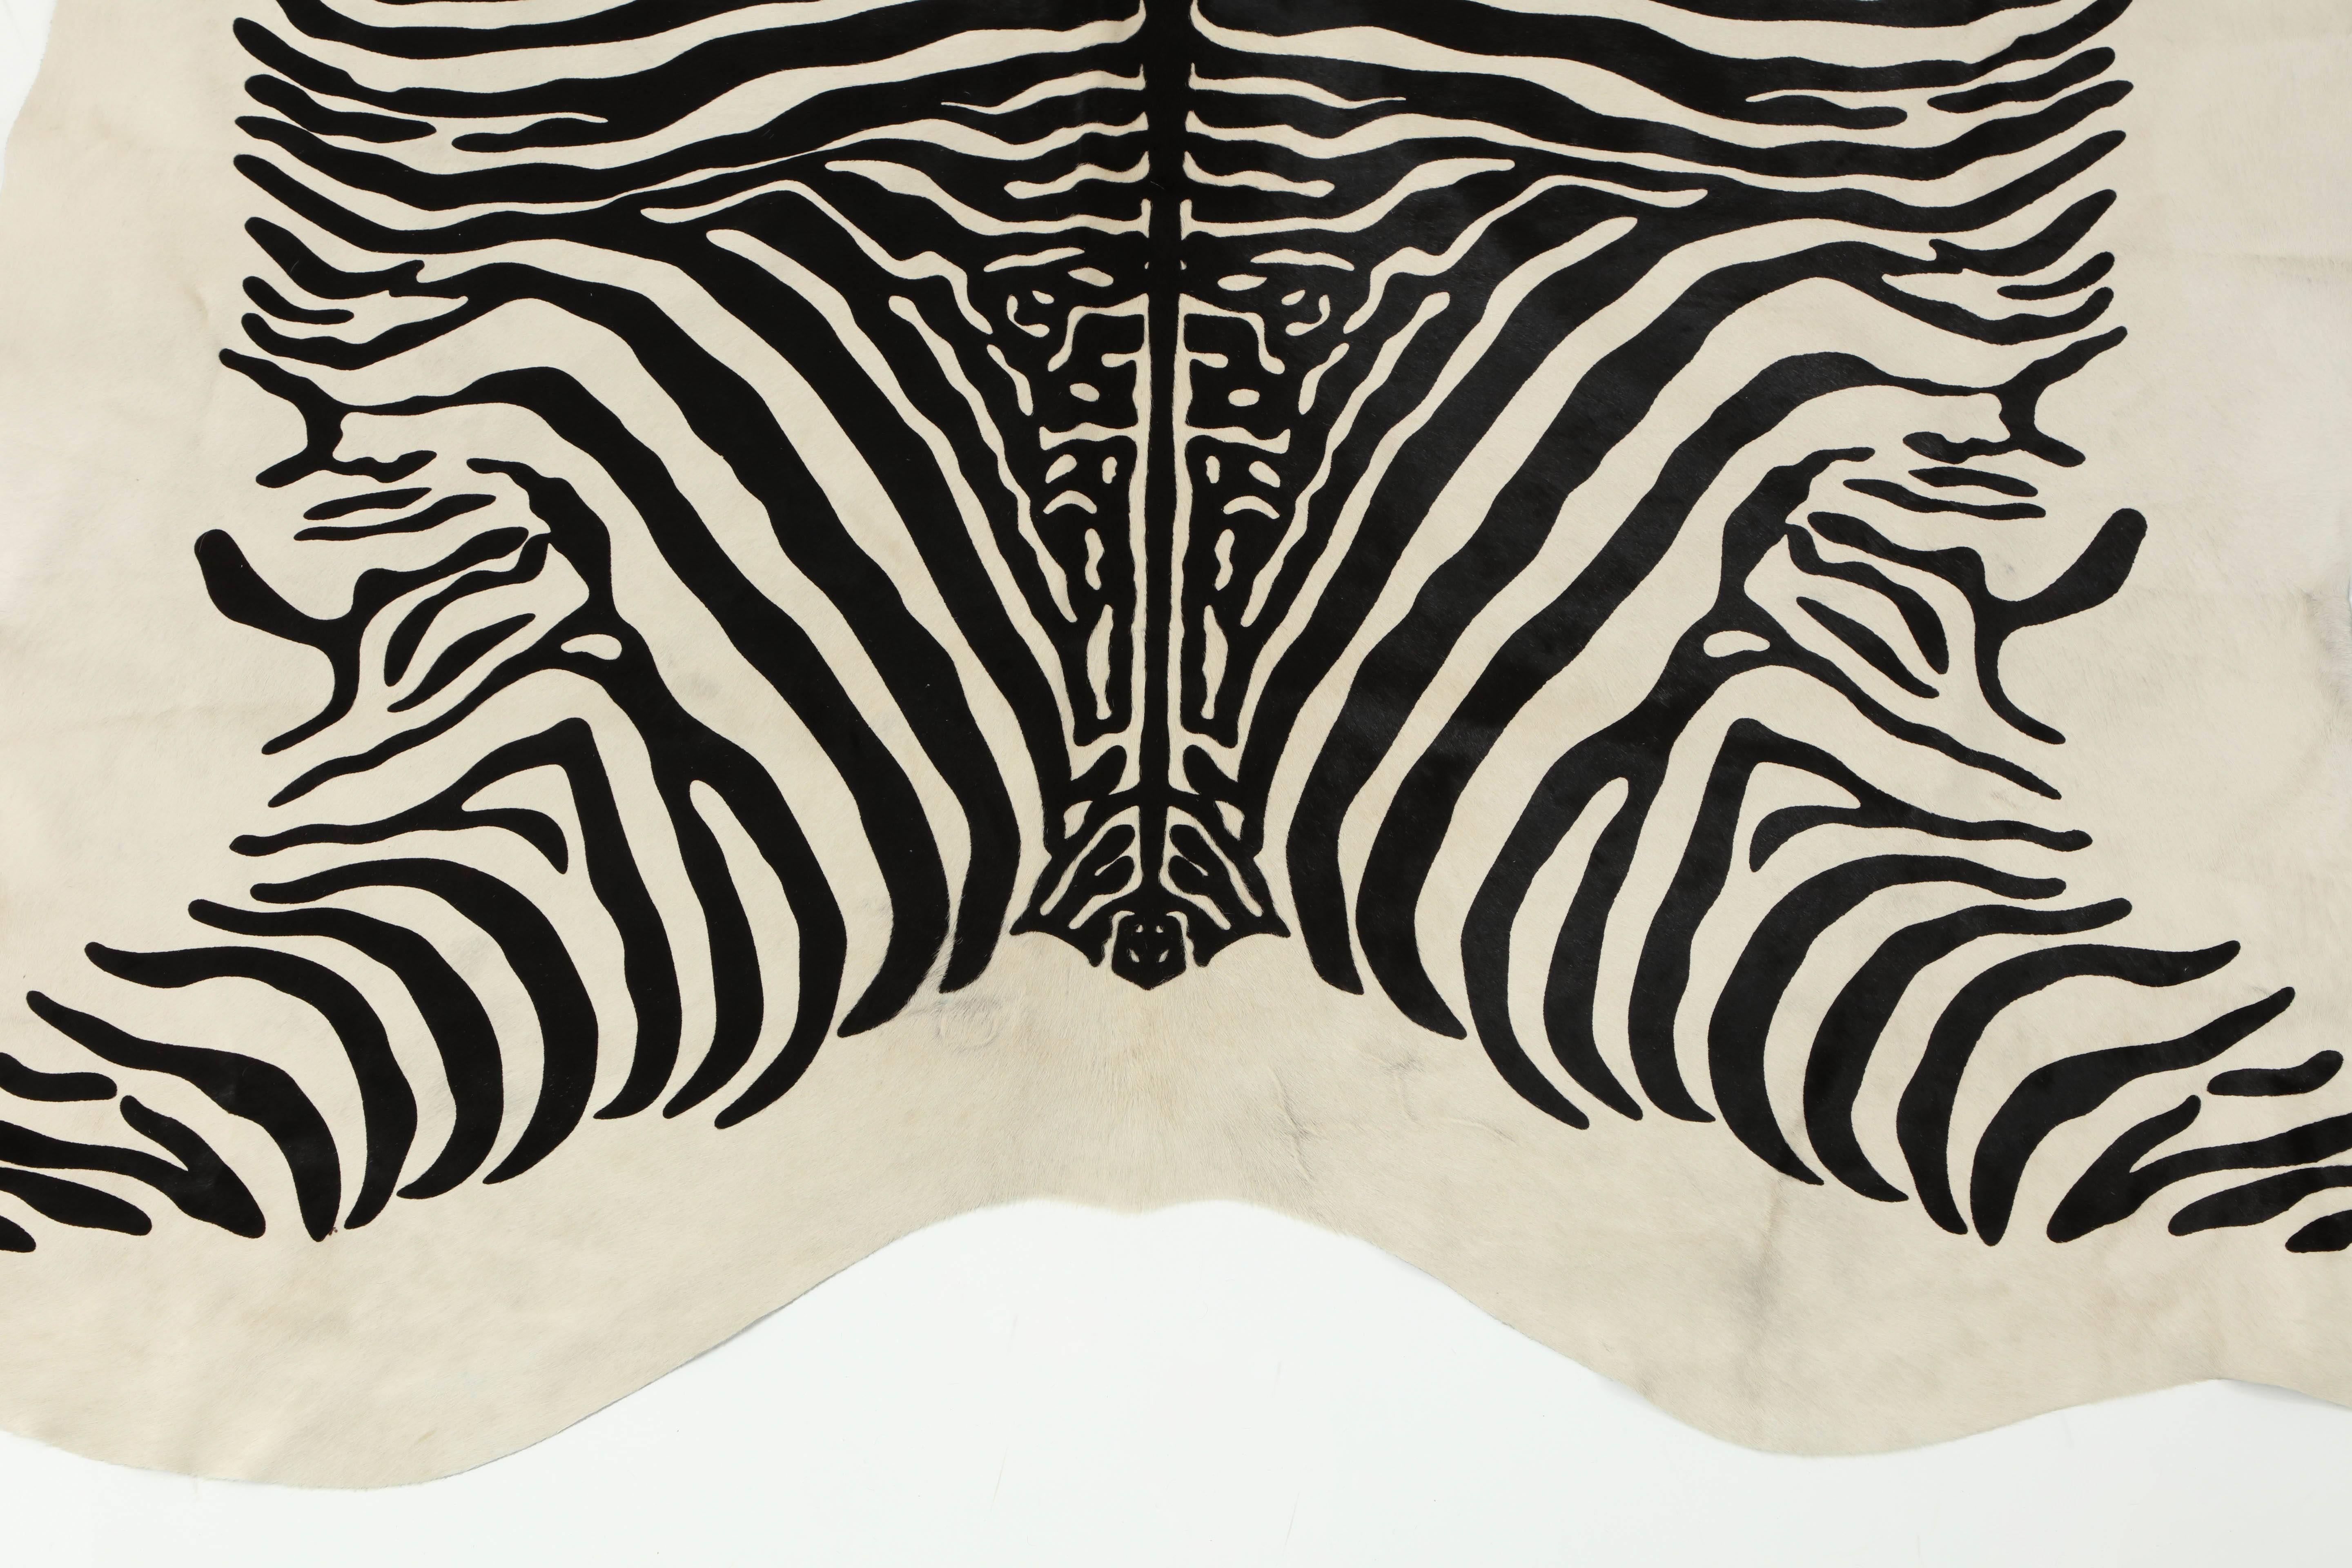 This contemporary stenciled zebra print Brazilian cowhide rug is made of 100% natural materials. Their tanneries are ISO-9001 certified for quality and ISO 14001 certified for low environmental impact which is what gives them their gold star rating